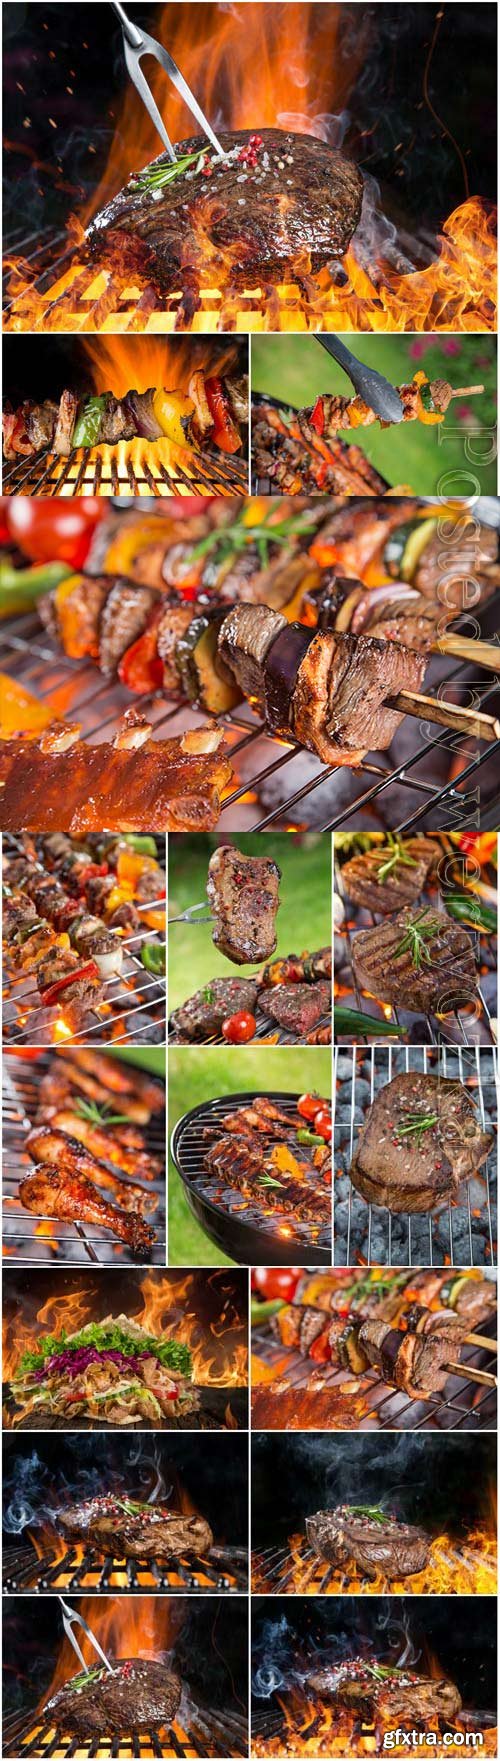 Barbecue and kebab stock photo